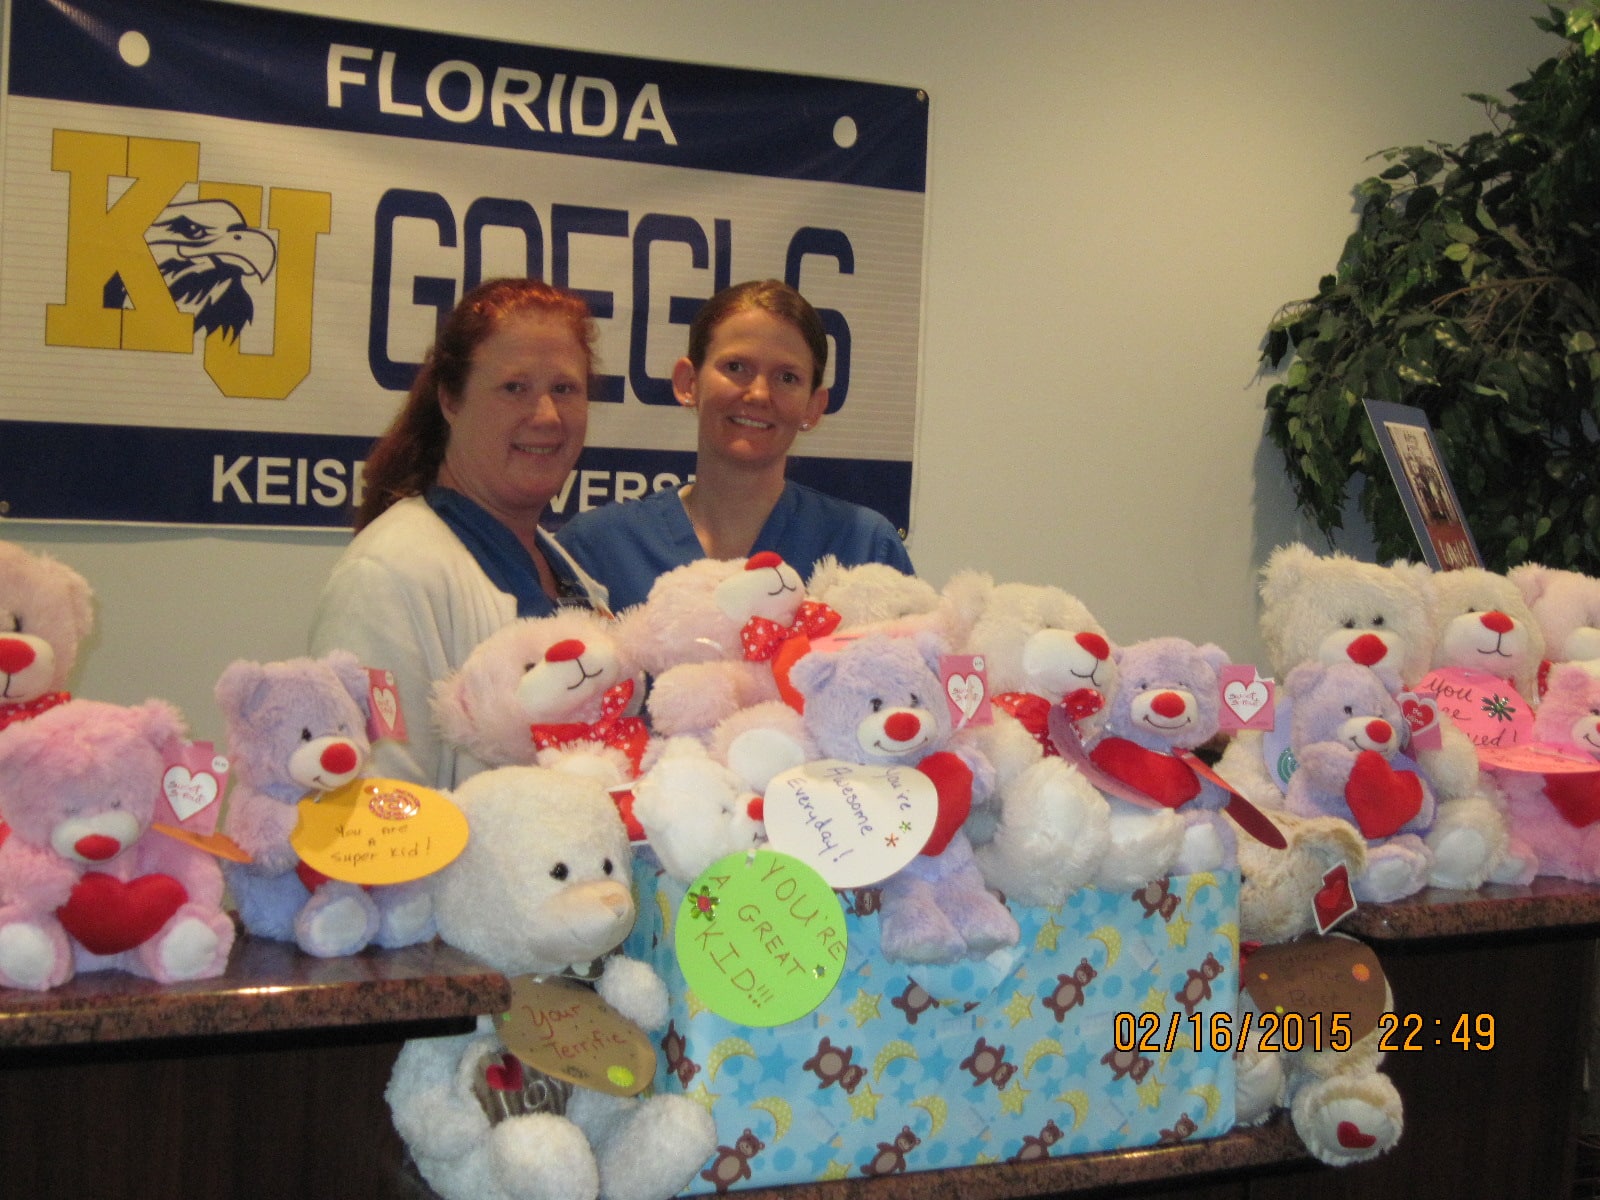 The SOTA Club in Tallahassee Raises Money for Teddy Bears for Abused Children